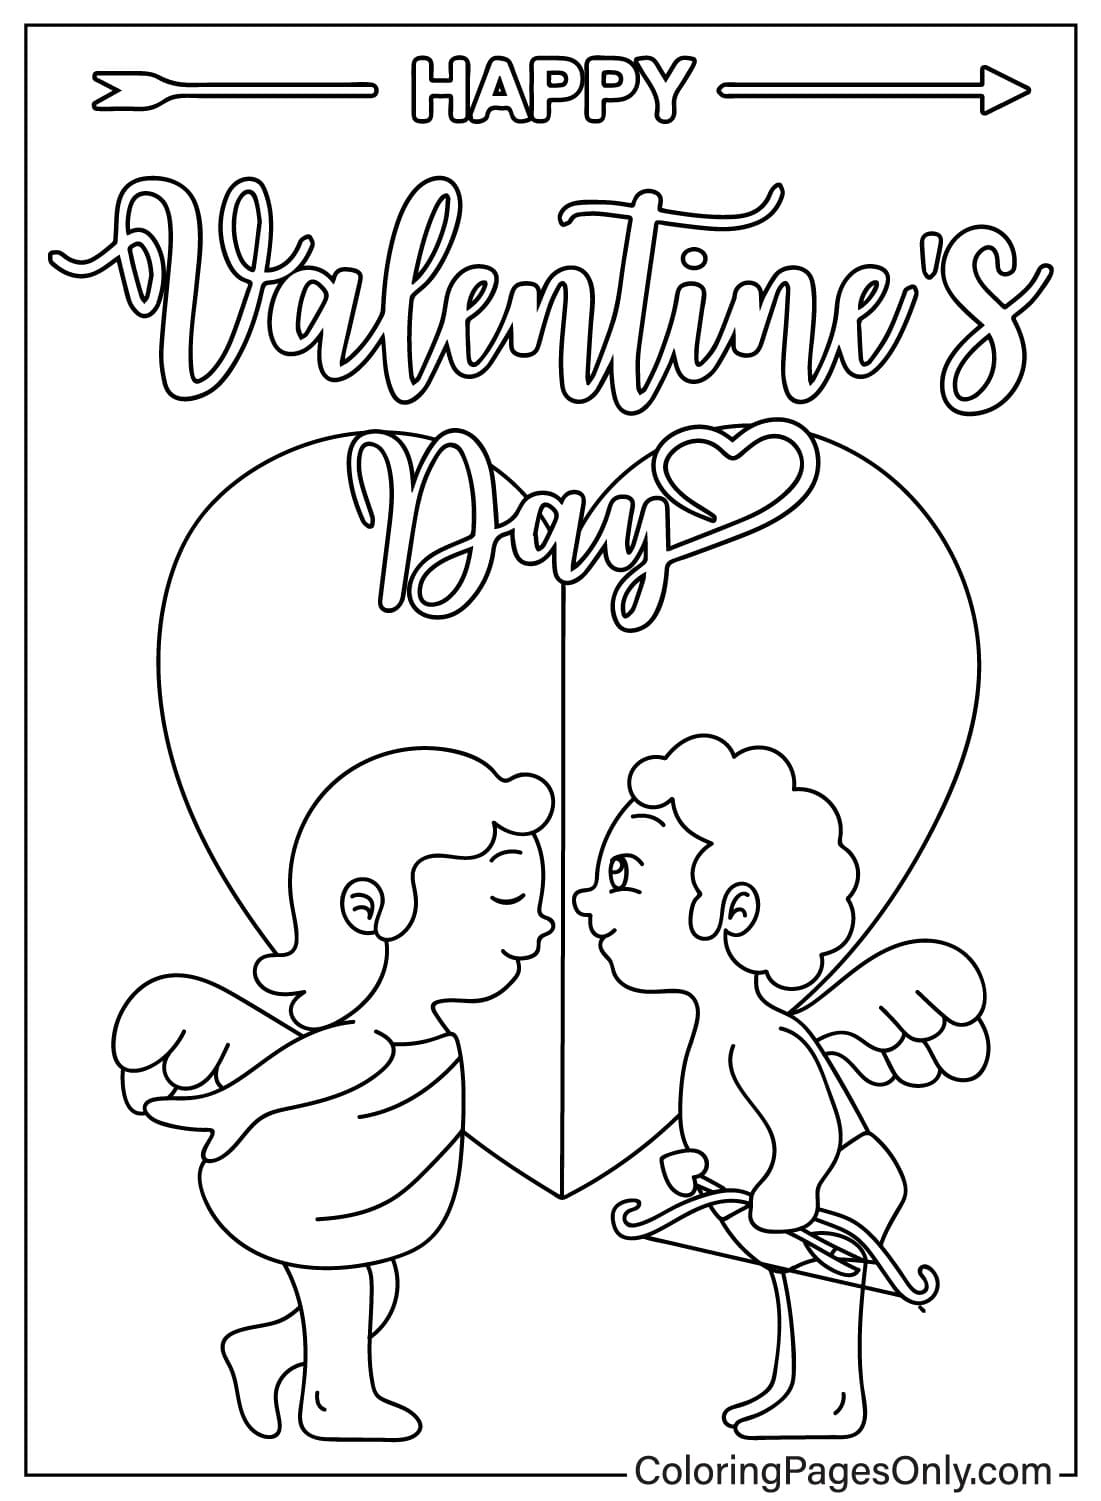 Valentine’s Day Cupid Coloring Page Free from Valentine's Day